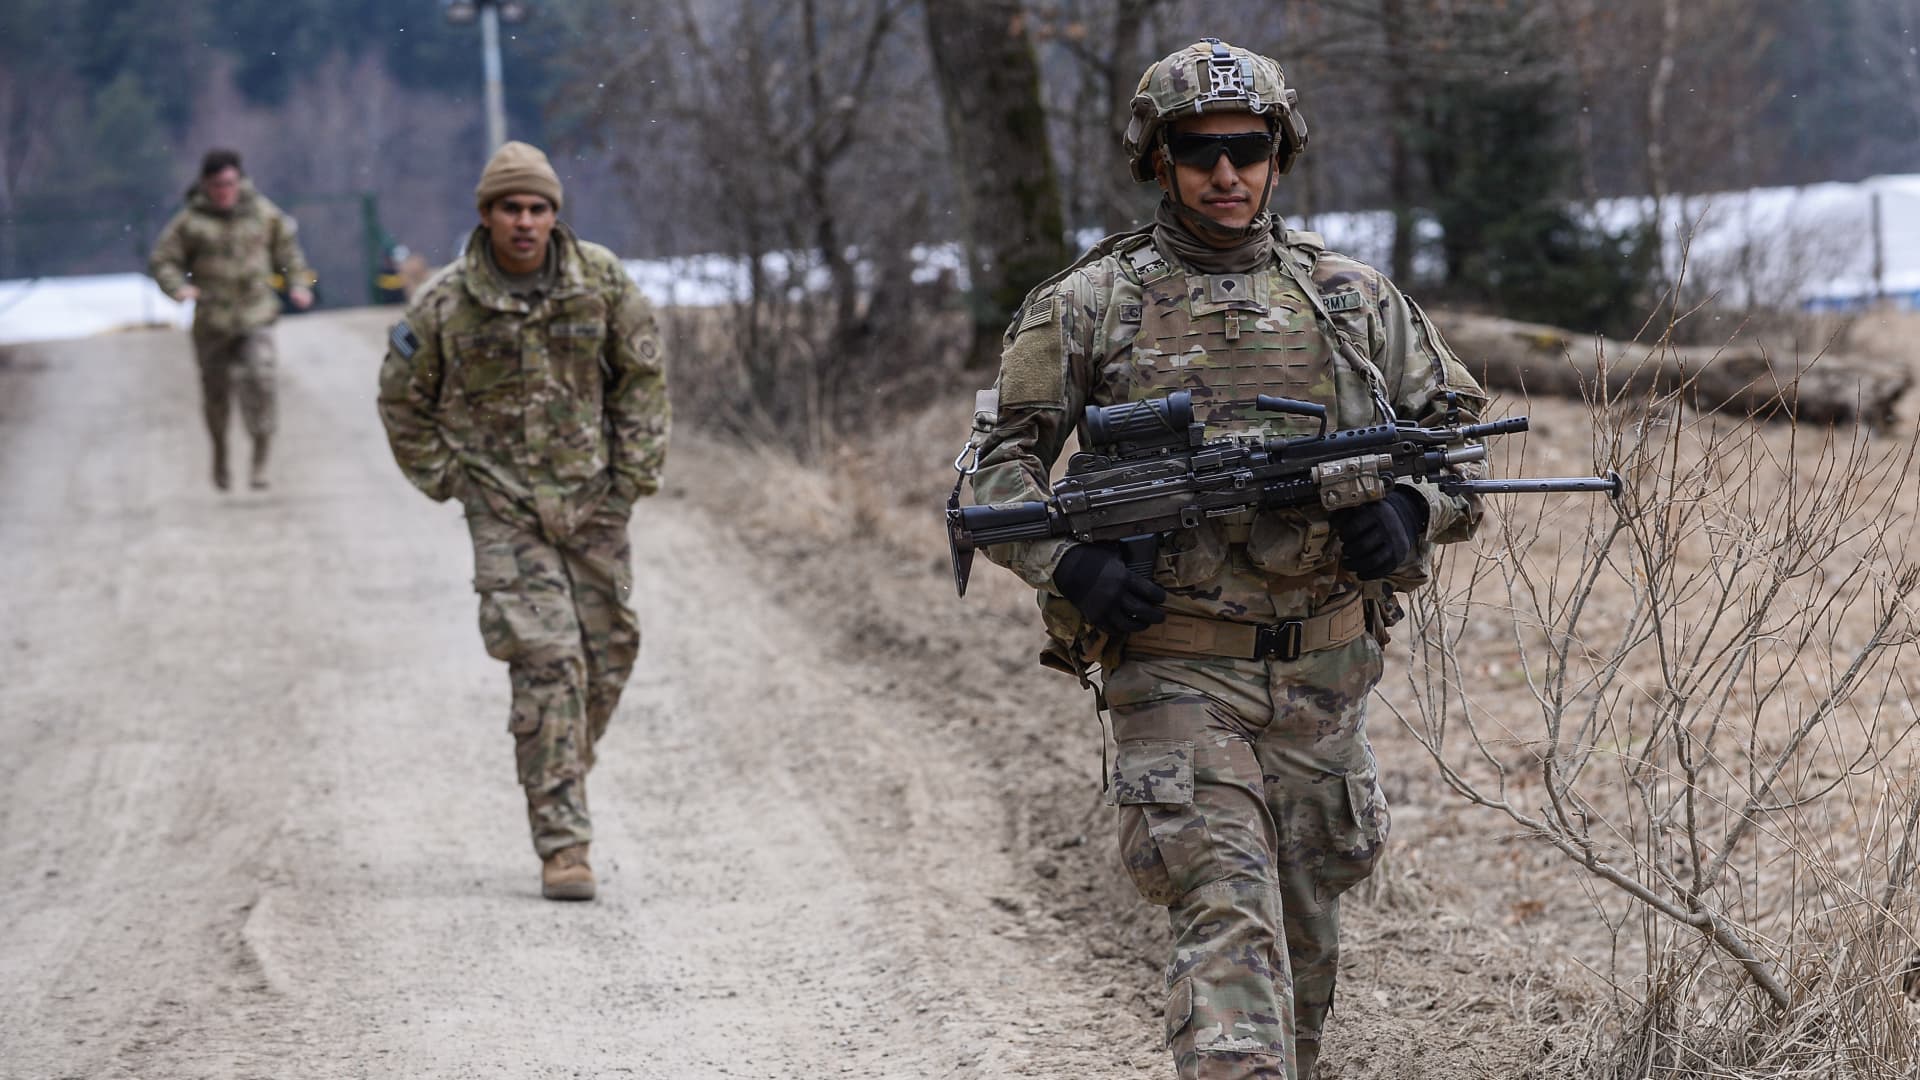 U.S. Army soldiers assigned to the 82nd Airborne carry military equipment as they take part in an exercise outside the operating base at the Arlamow Airport on March 7th, 2022 in Wola Korzeniecka, Poland.